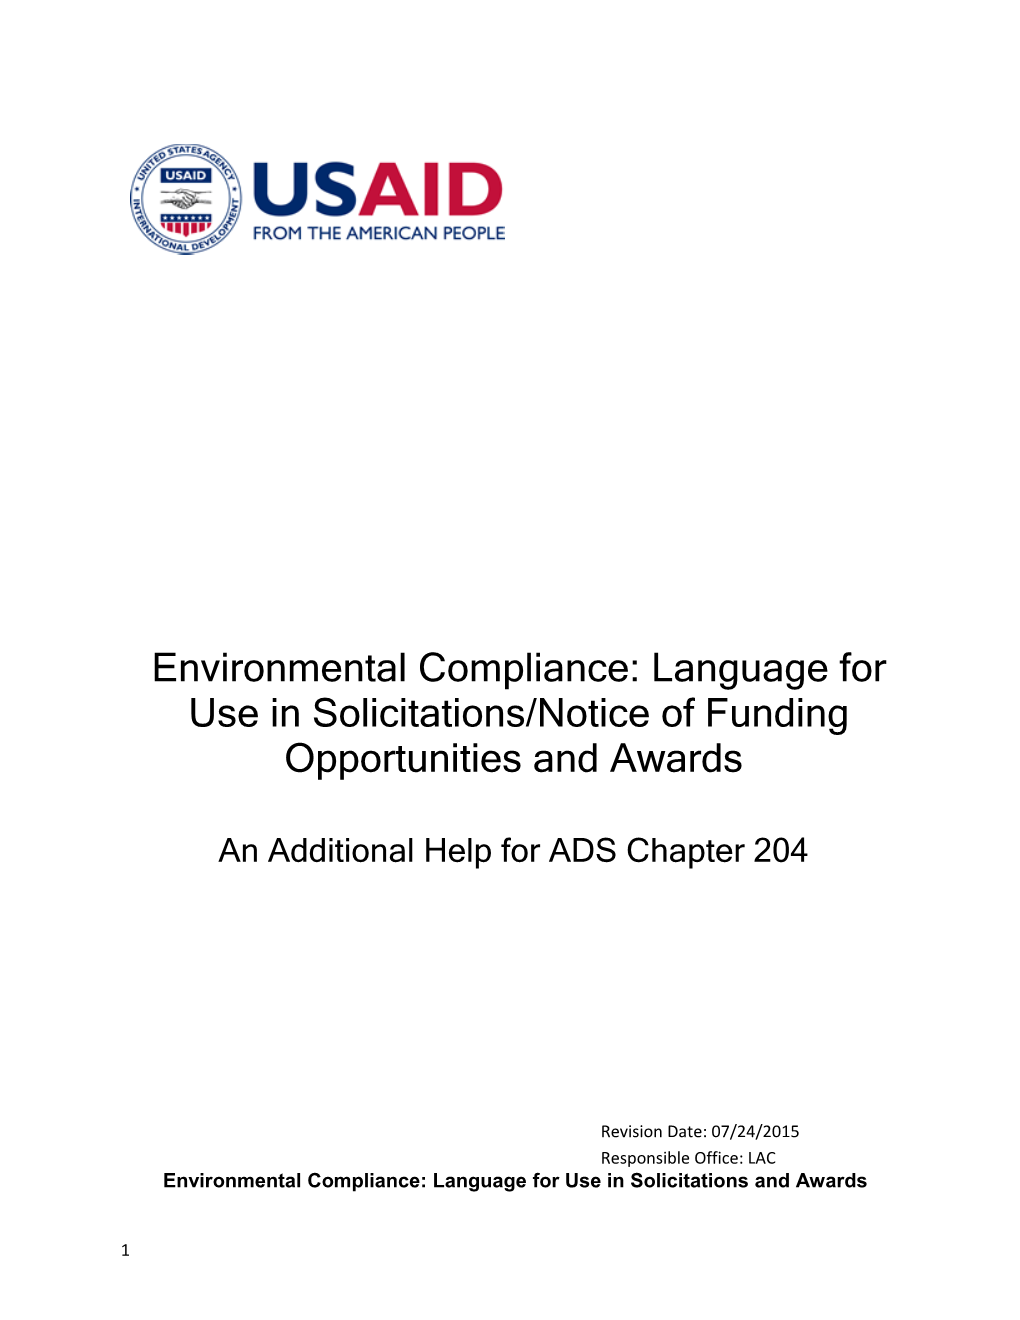 Environmental Compliance: Language for Use in Solicitations/Notice of Funding Opportunities